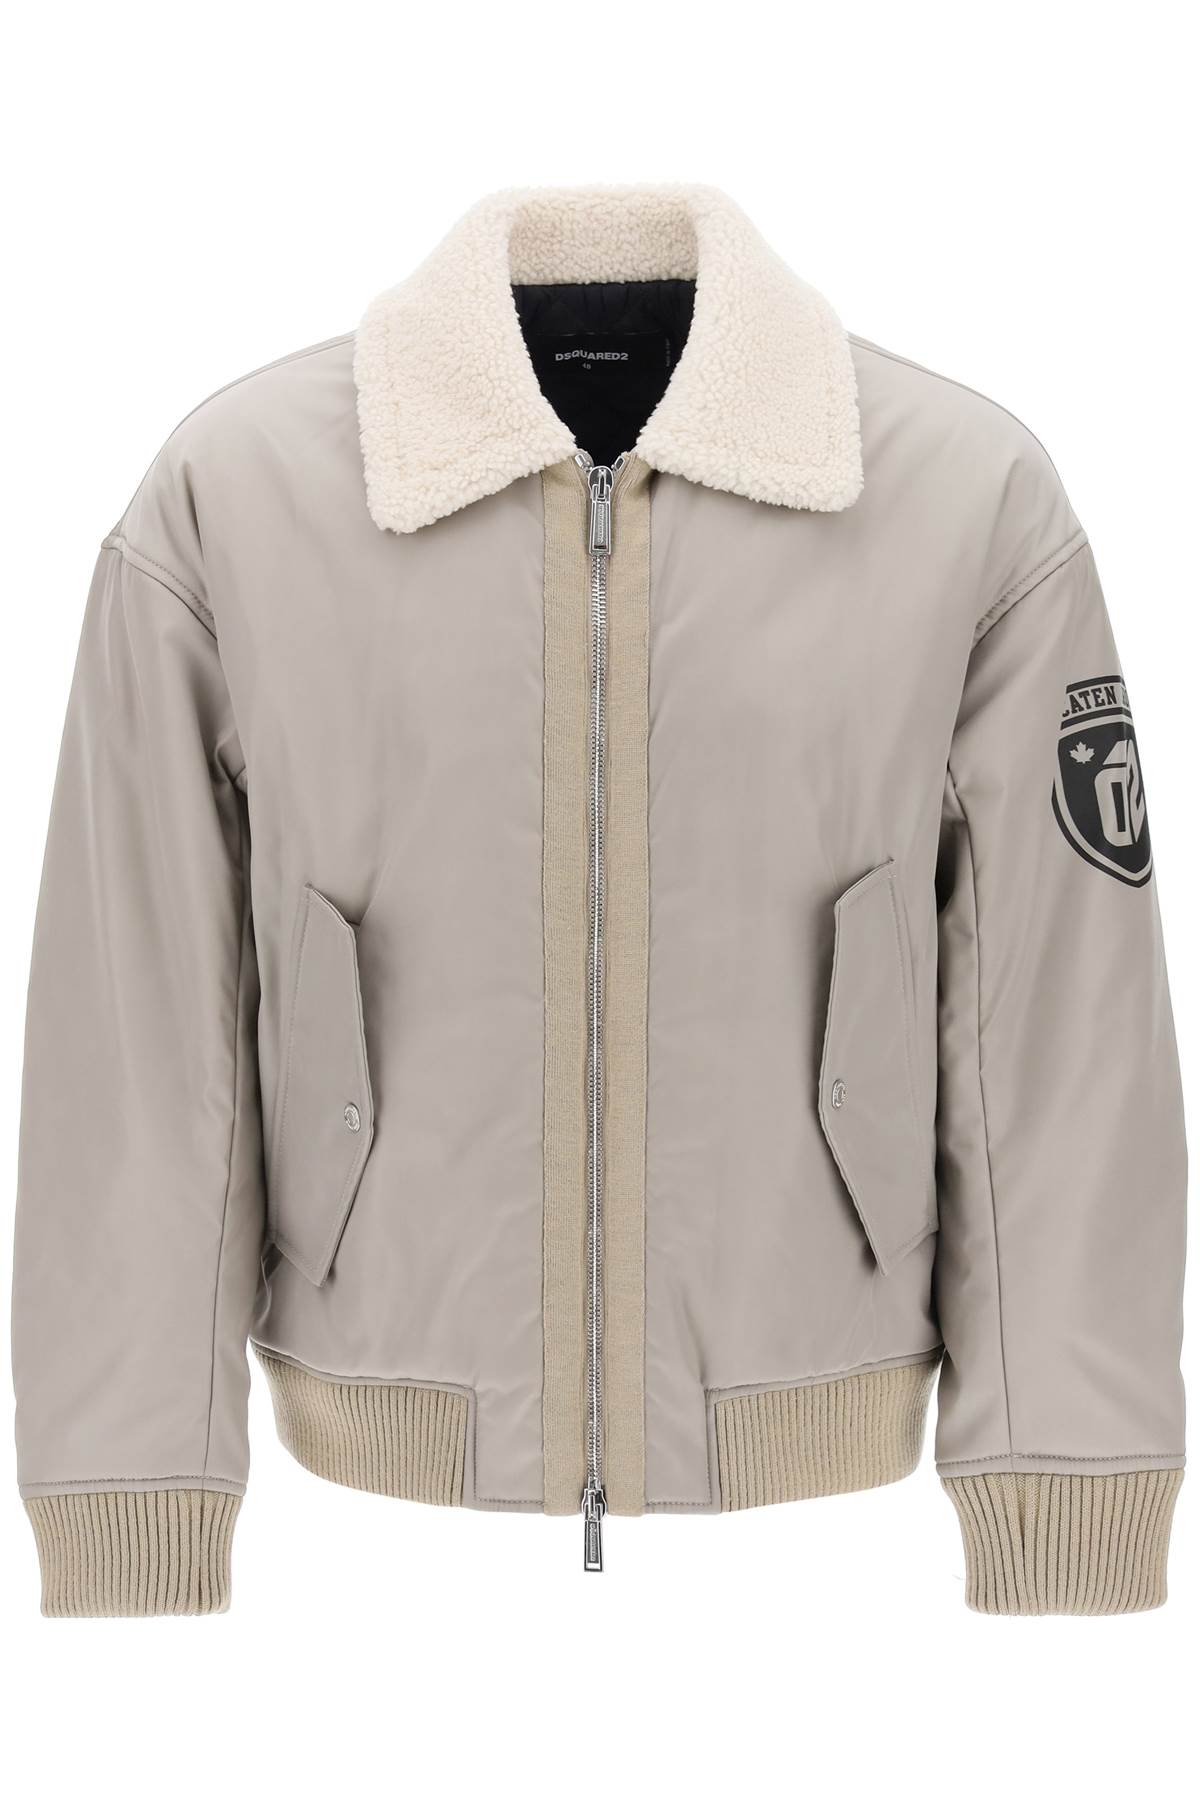 DSQUARED2 PADDED BOMBER JACKET WITH COLLAR IN LAMB FUR